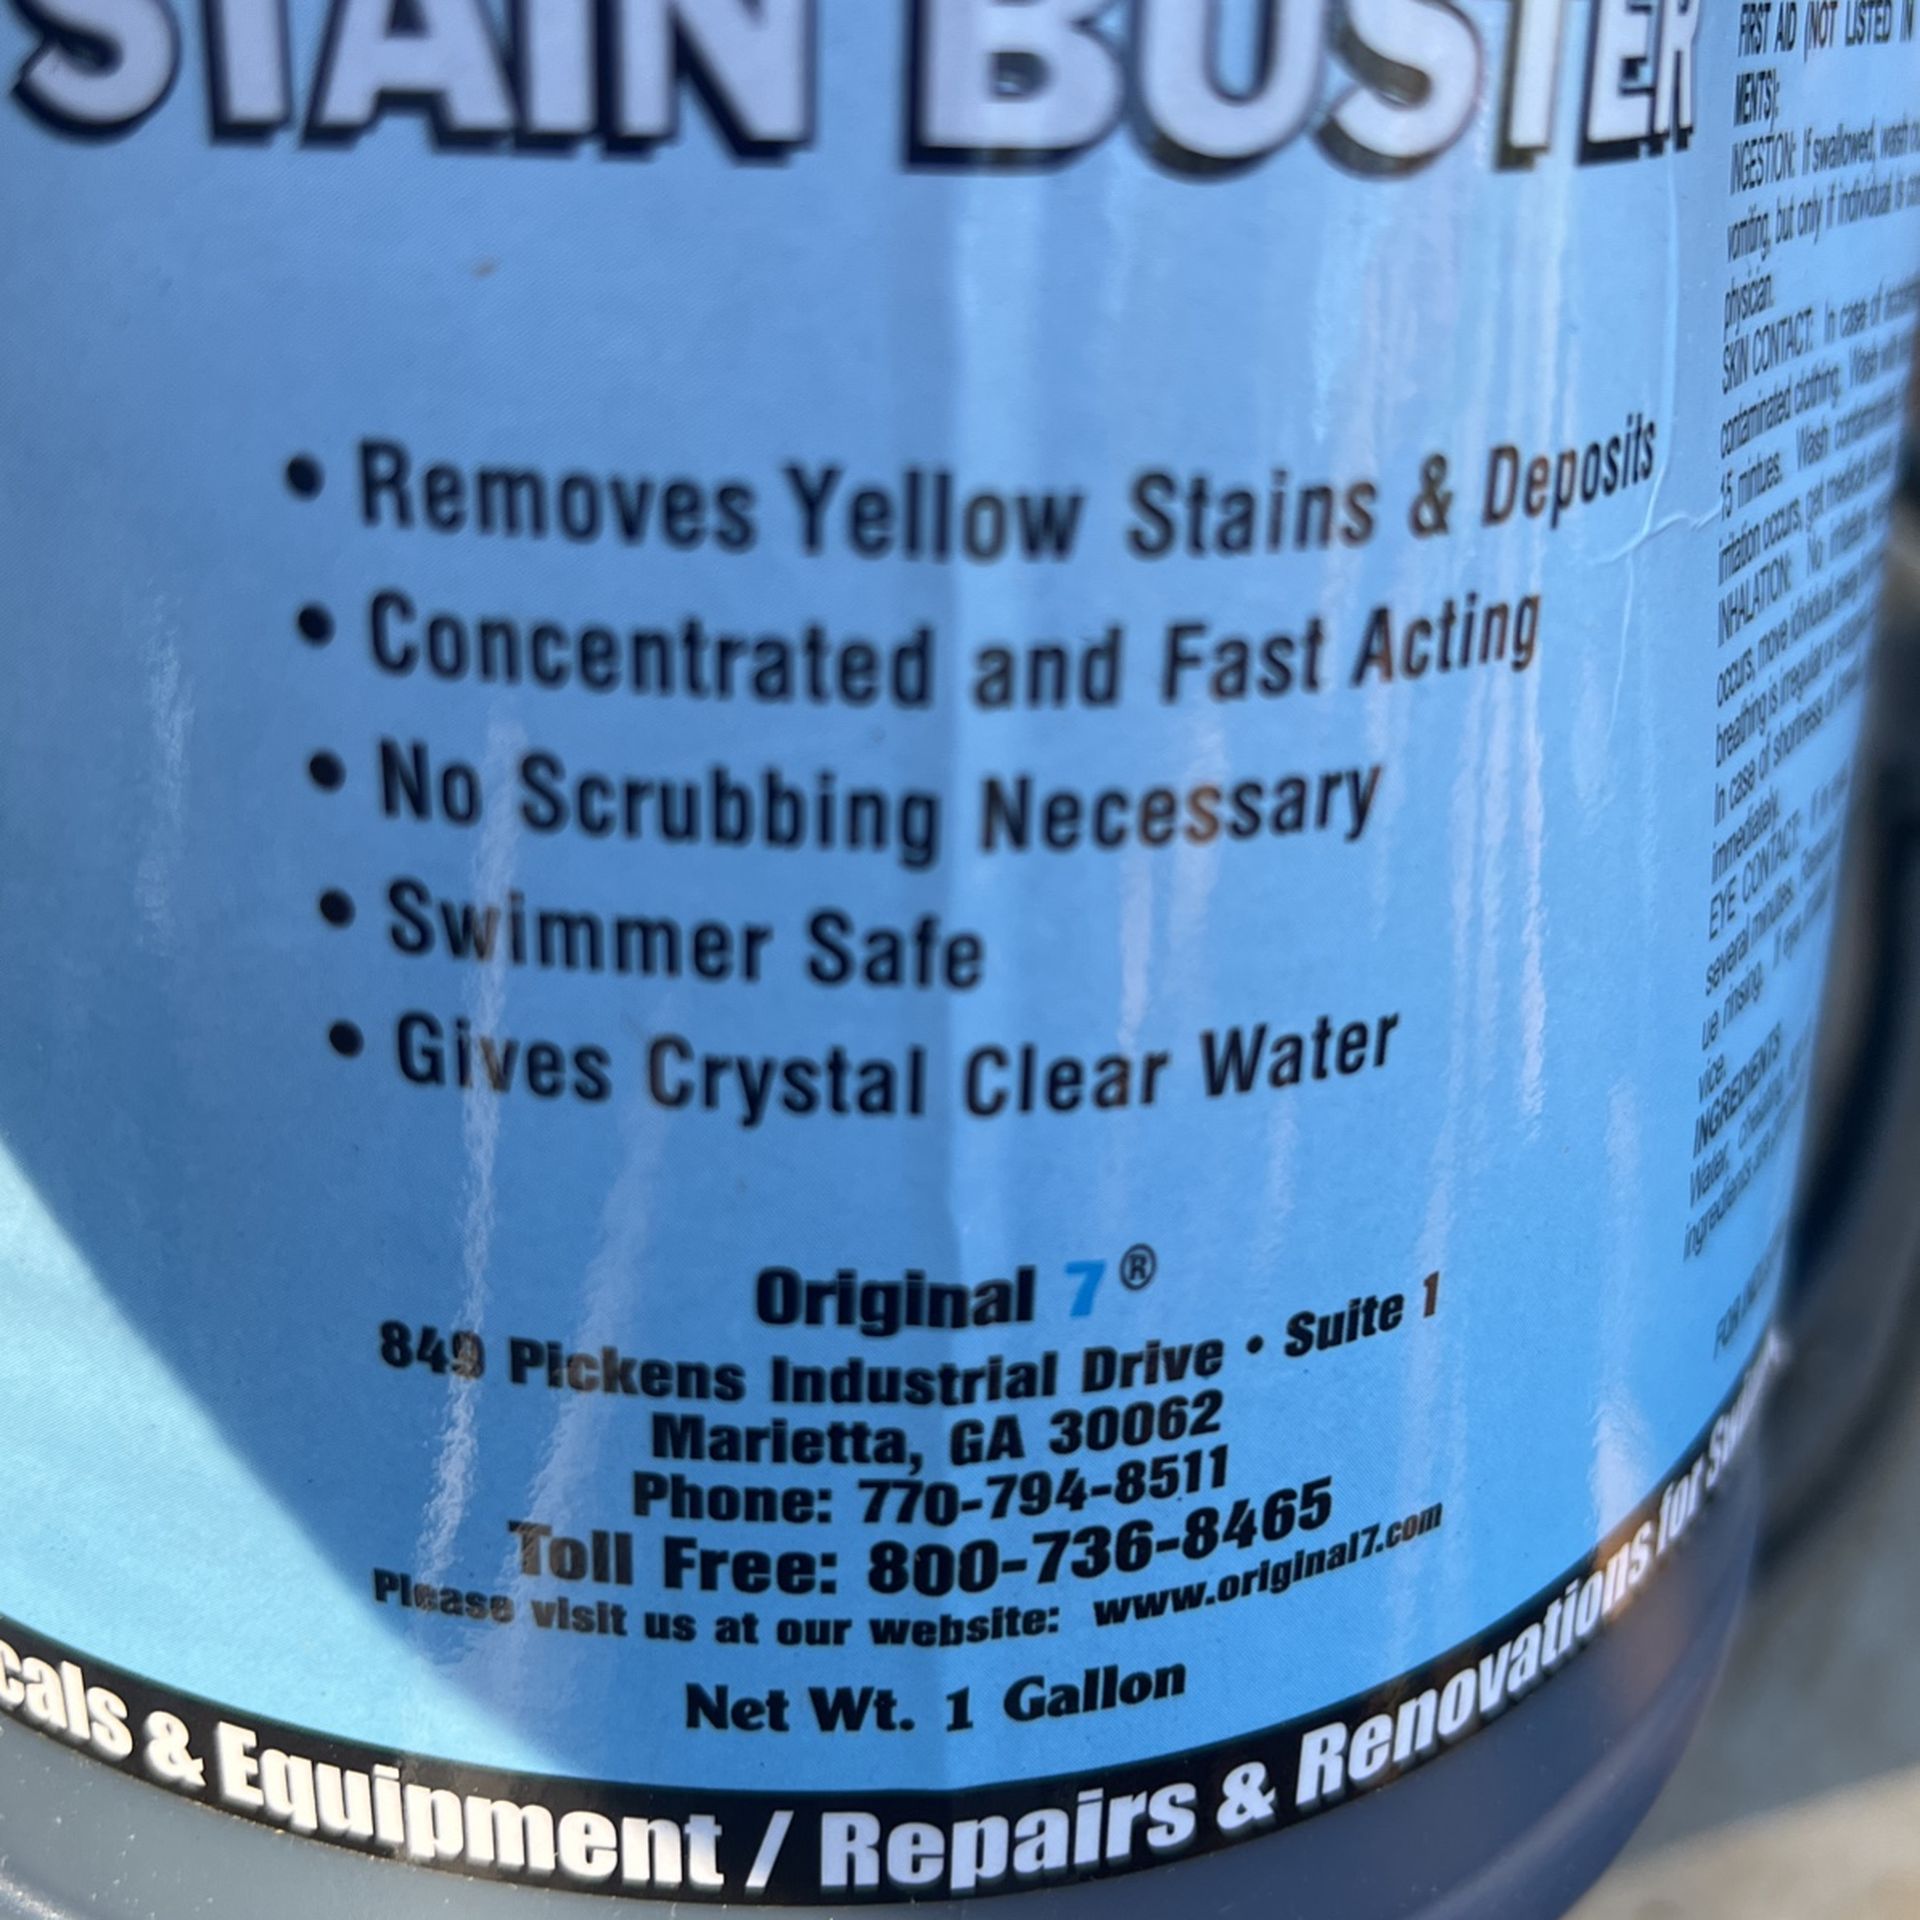 Stain Buster Pool Cleaner 